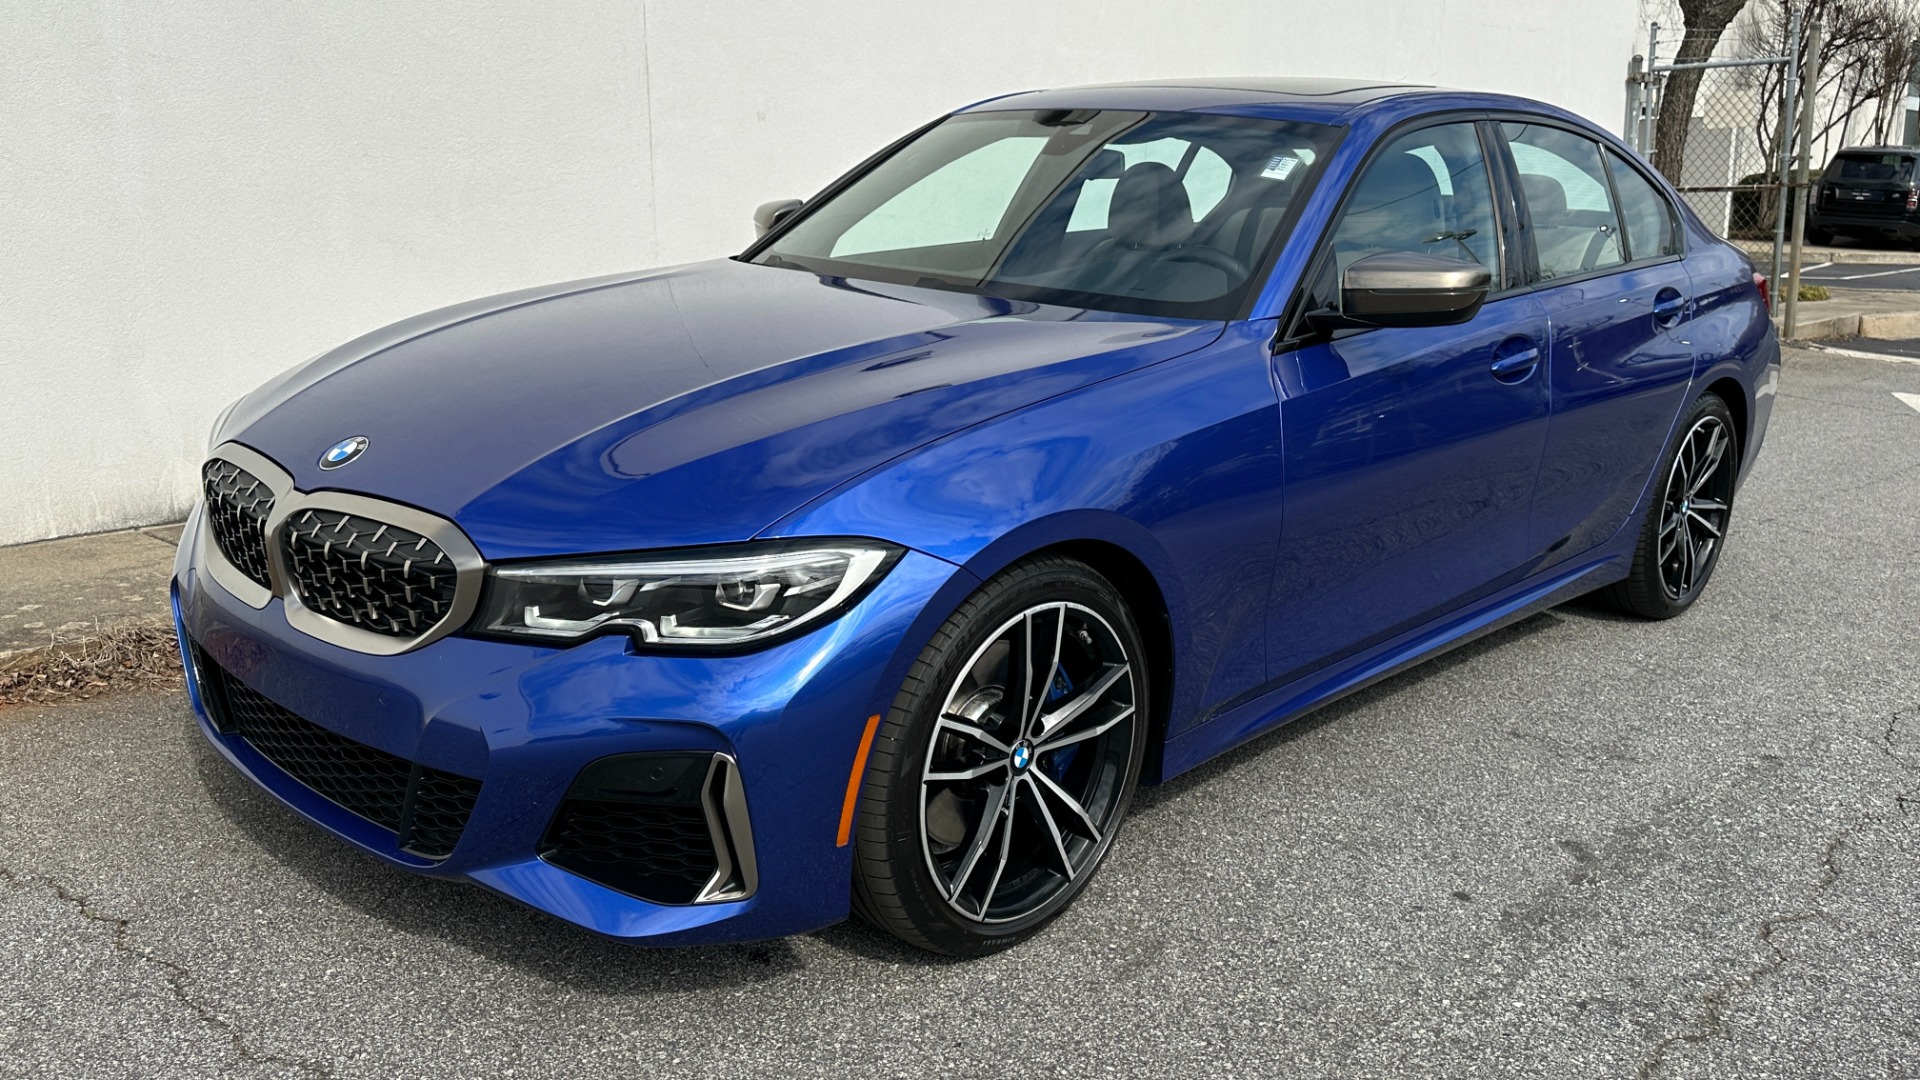 Used 2020 BMW 3 Series M340i / M SPORT BRAKES / M PERF EXHAUST / PREMIUM PACKAGE for sale $46,495 at Formula Imports in Charlotte NC 28227 2